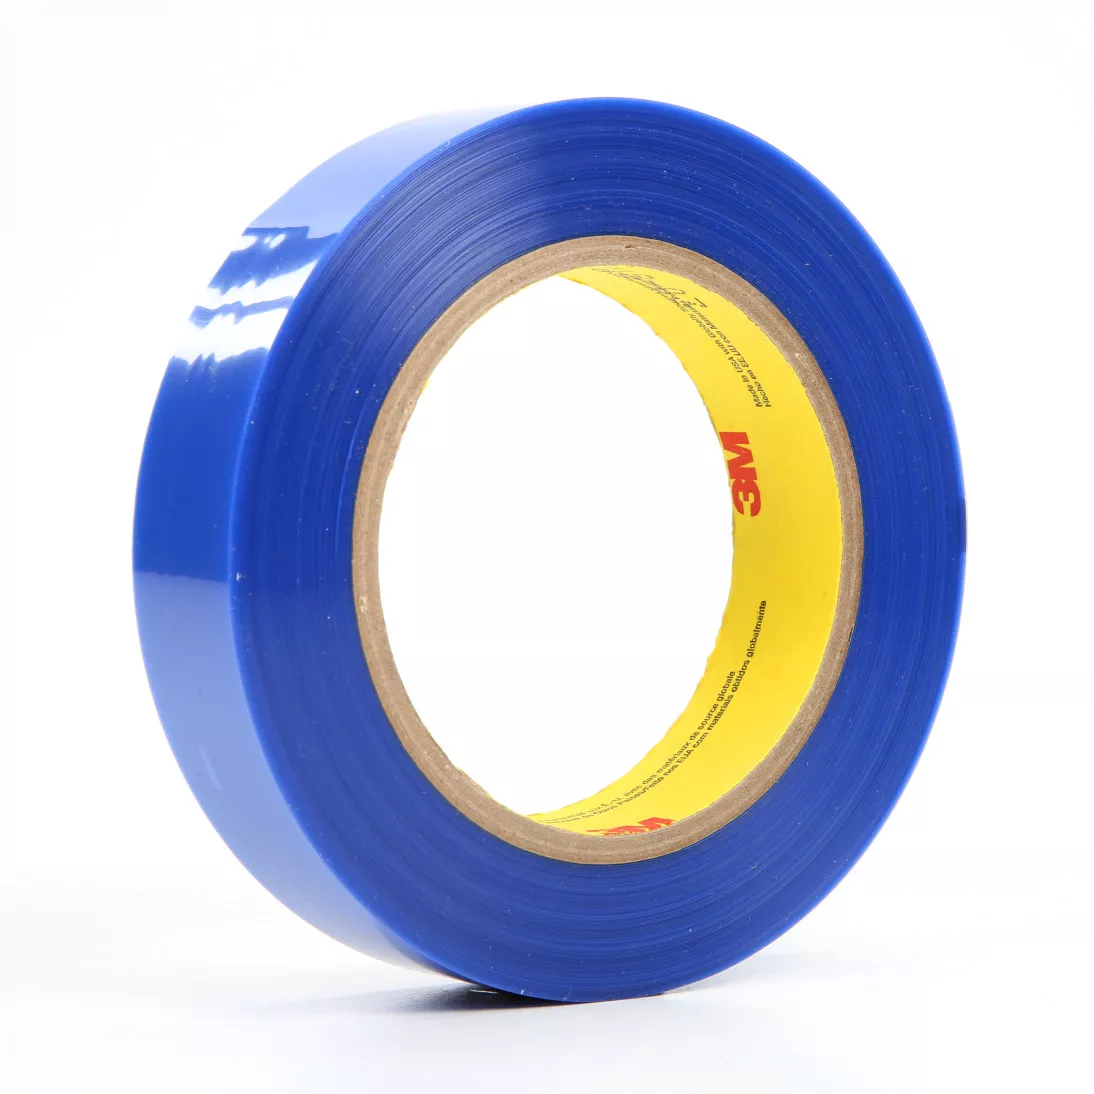 3M™ Polyester Tape 8902, Blue, 1 in x 72 yd, 3.4 mil, 36 rolls per case